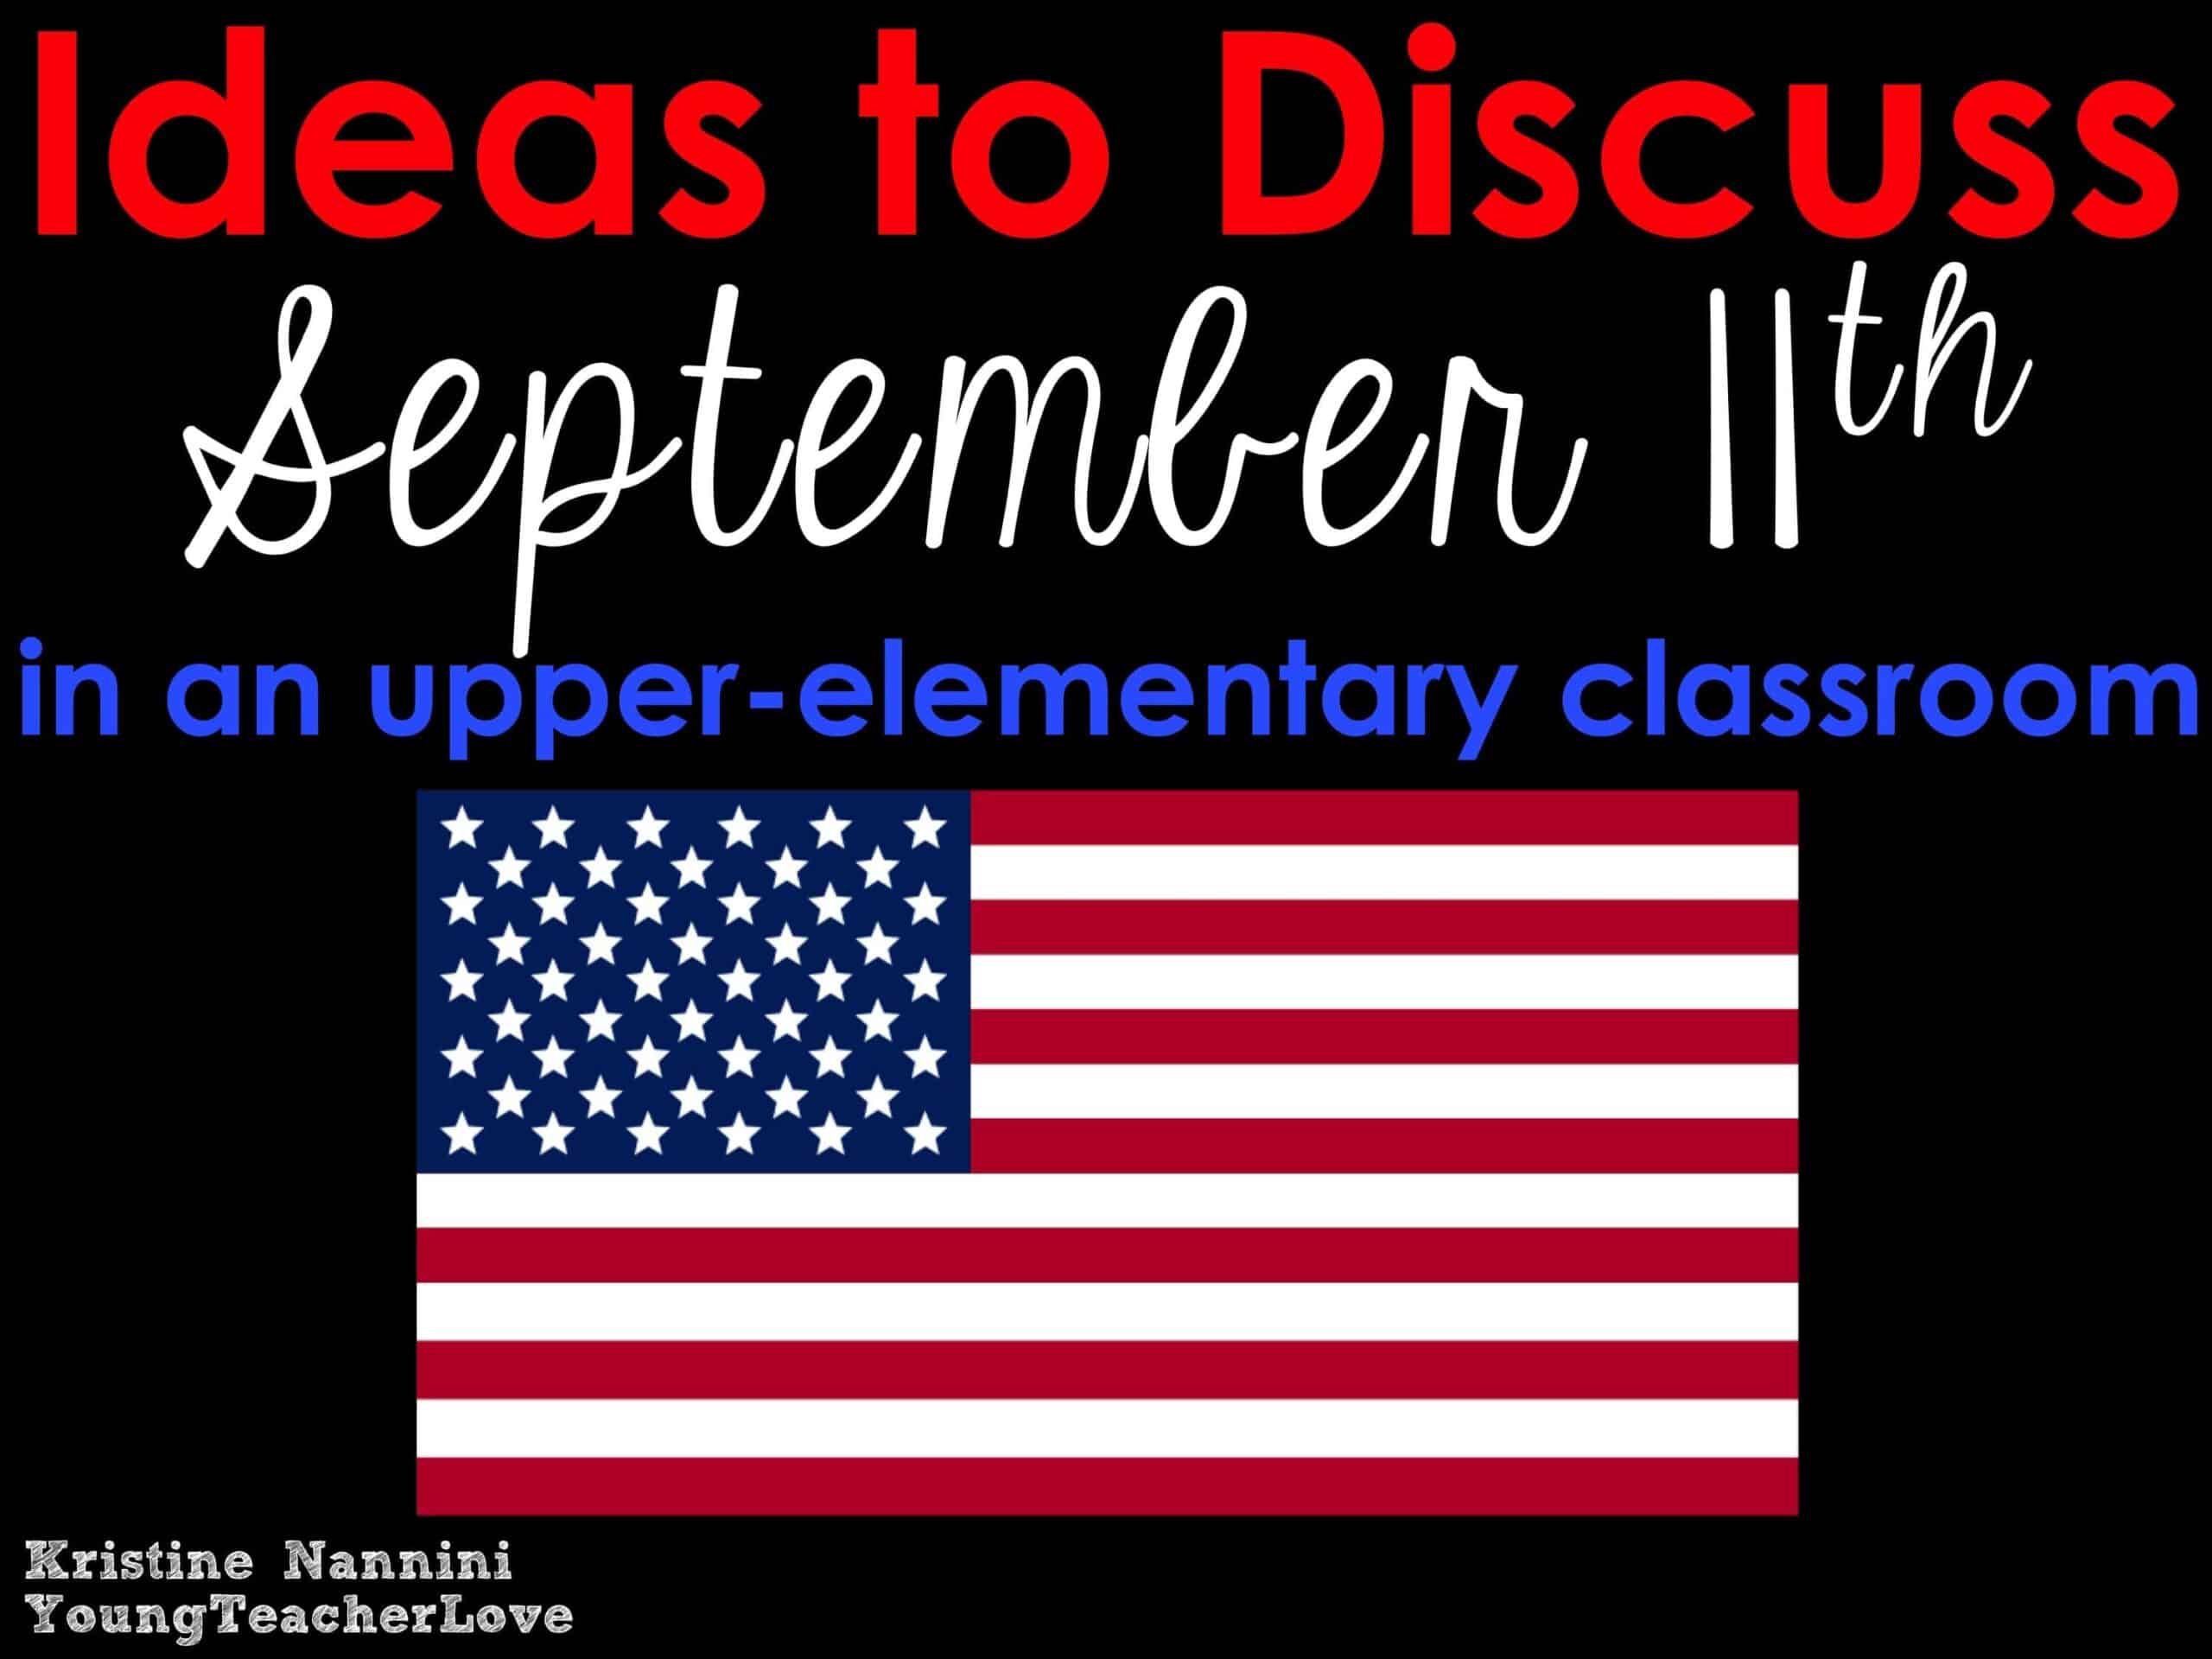 Ideas to Discuss September 11th in an Upper-Elementary Classroom